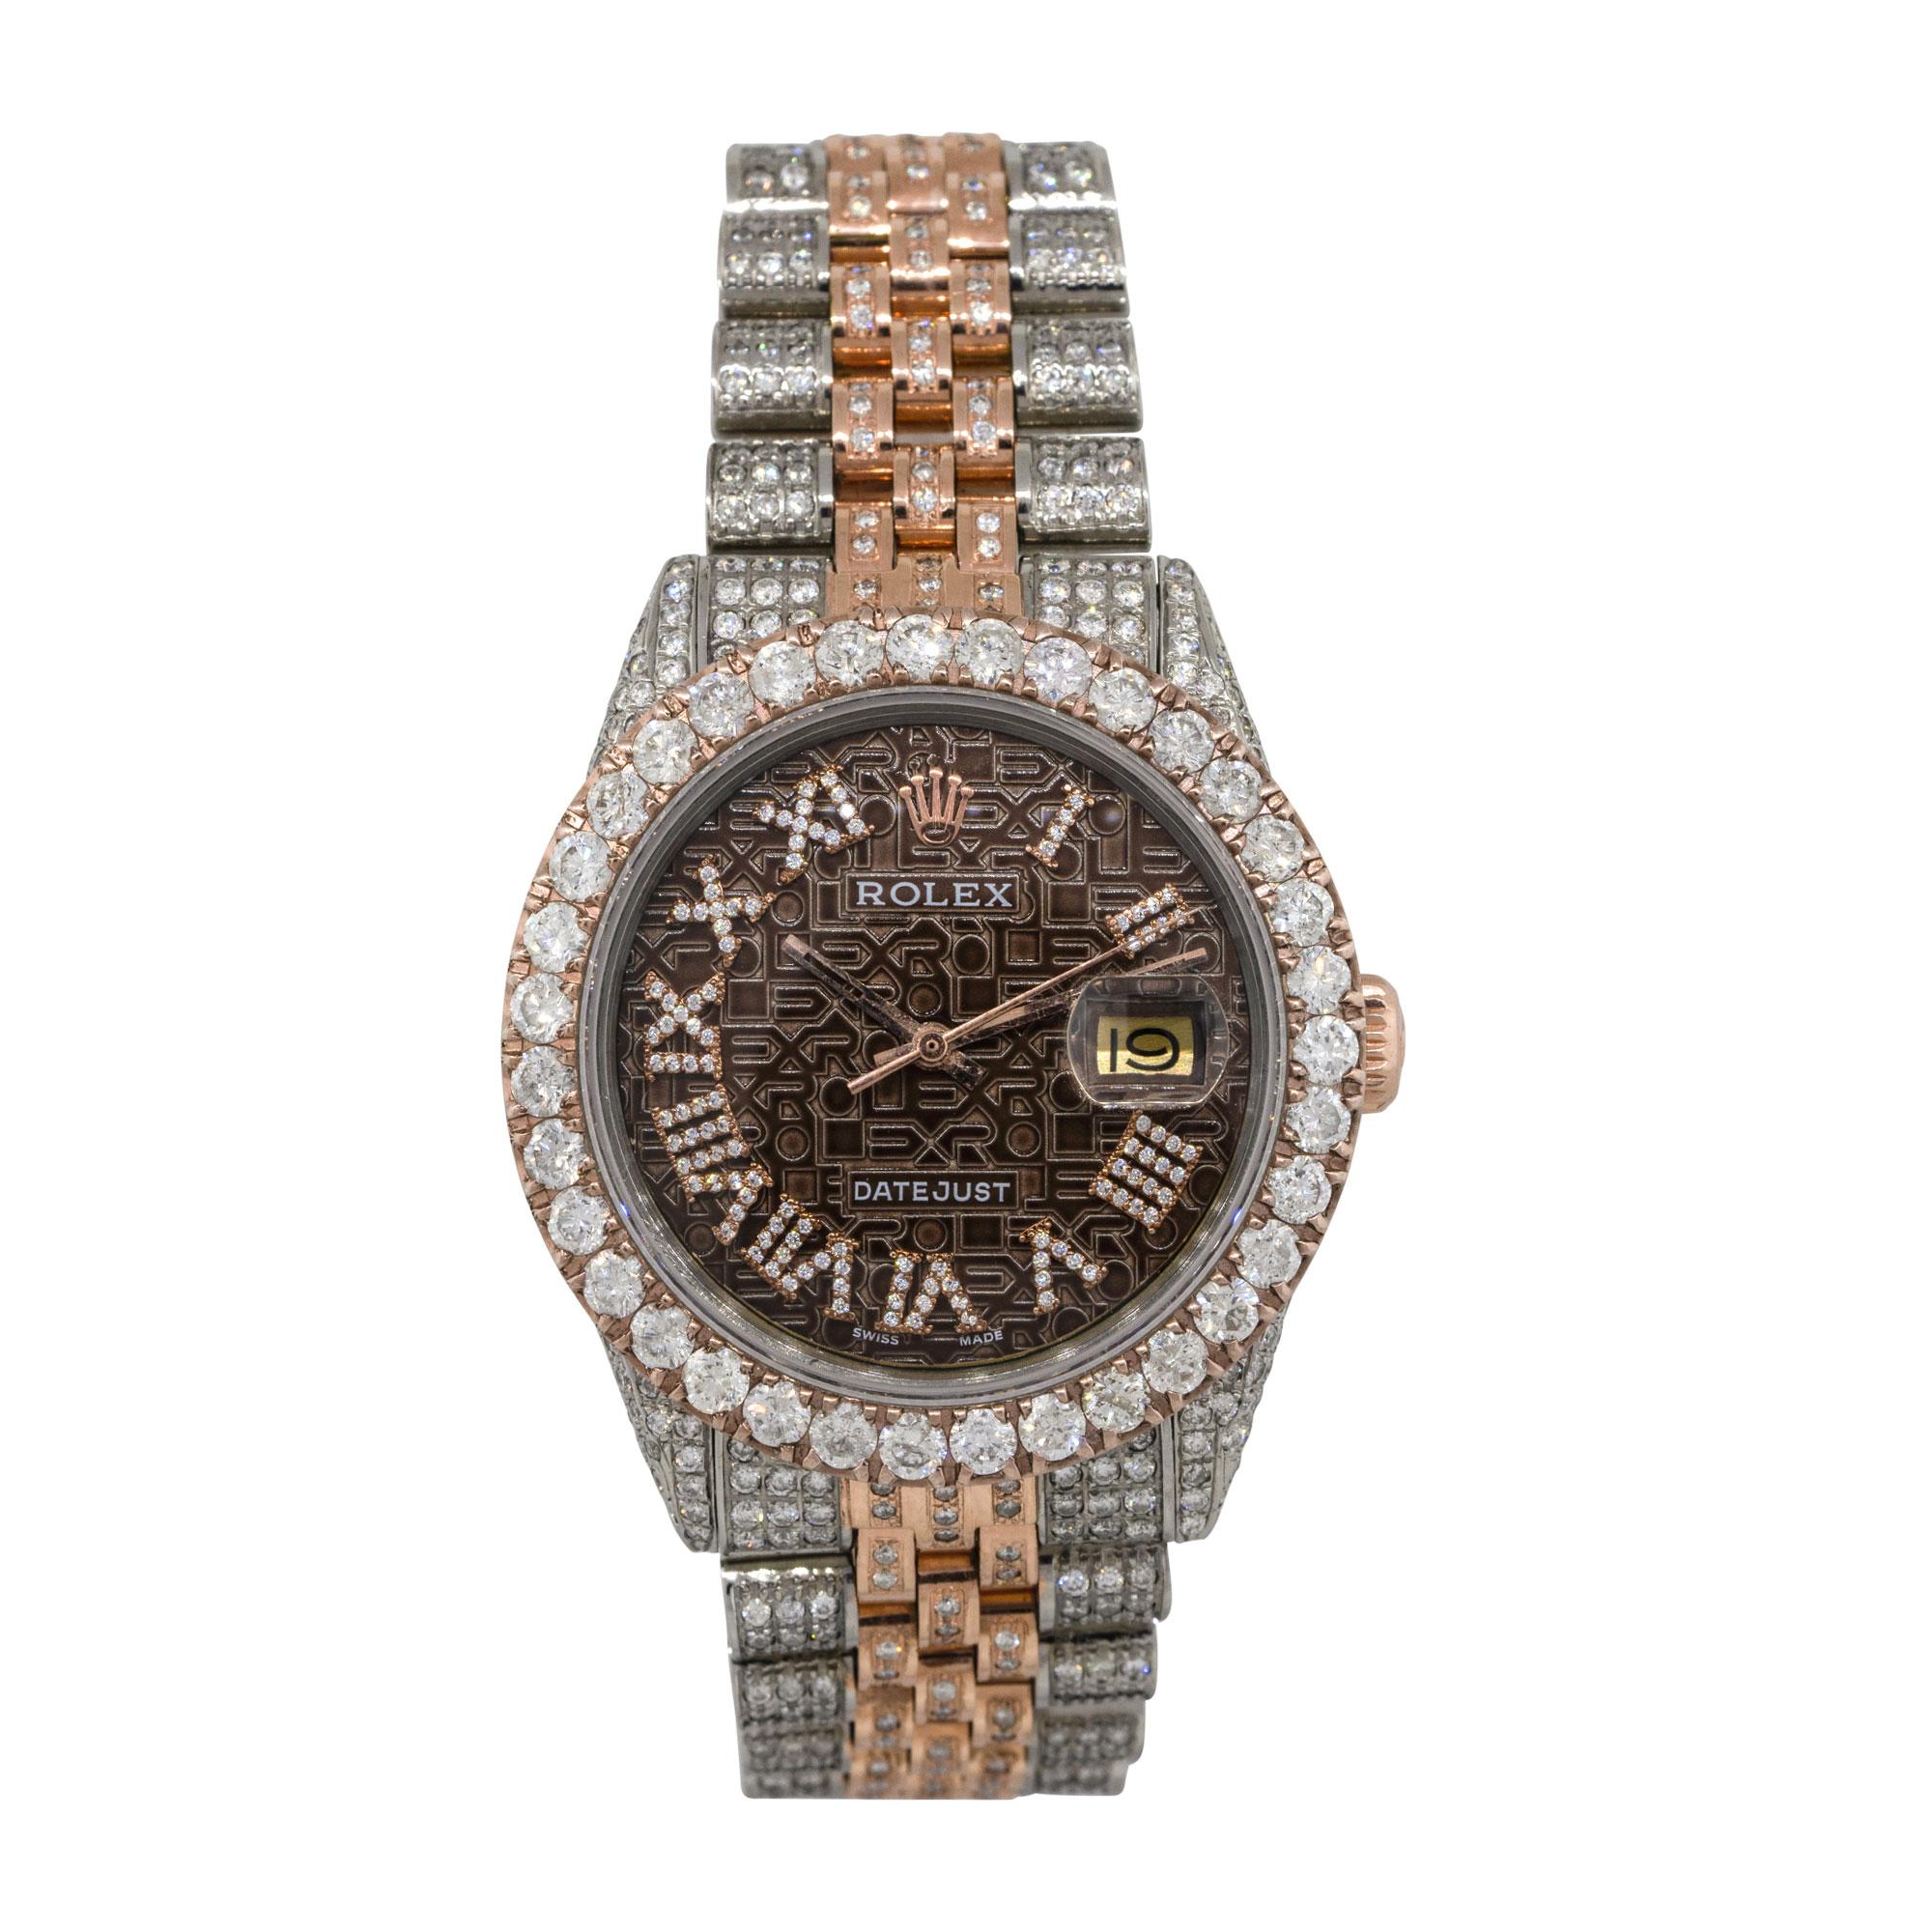 Brand: Rolex
MPN: 1601
Model: Datejust
Case Material: Stainless steel with aftermarket Diamonds
Case Diameter: 36mm
Crystal: Sapphire Crystal
Bezel: 18k Rose Gold fluted bezel with aftermarket Diamonds
Dial: Chocolate dial with rose gold hands and